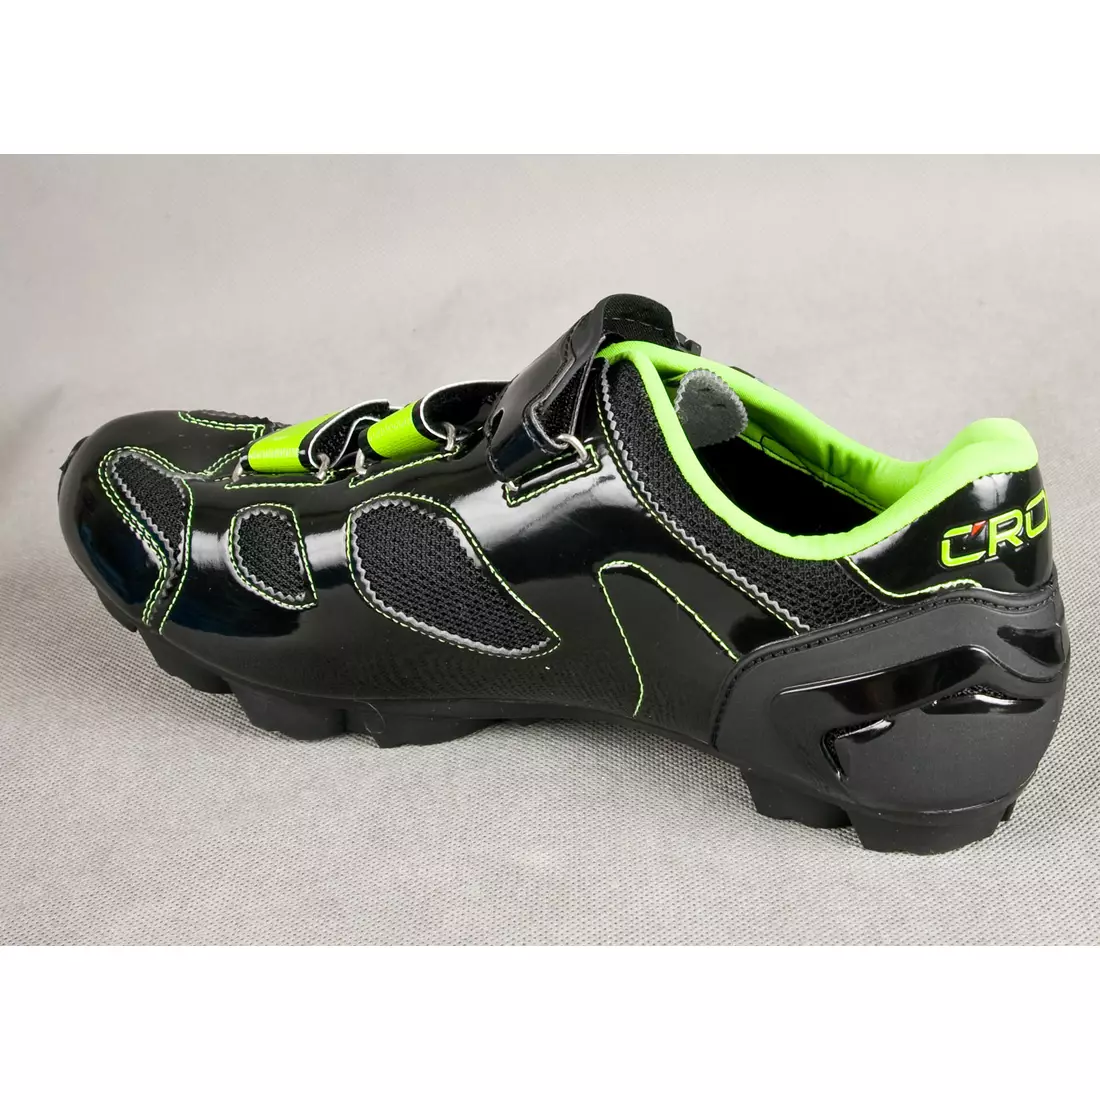 CRONO TRACK - MTB cycling shoes - color: Black and green